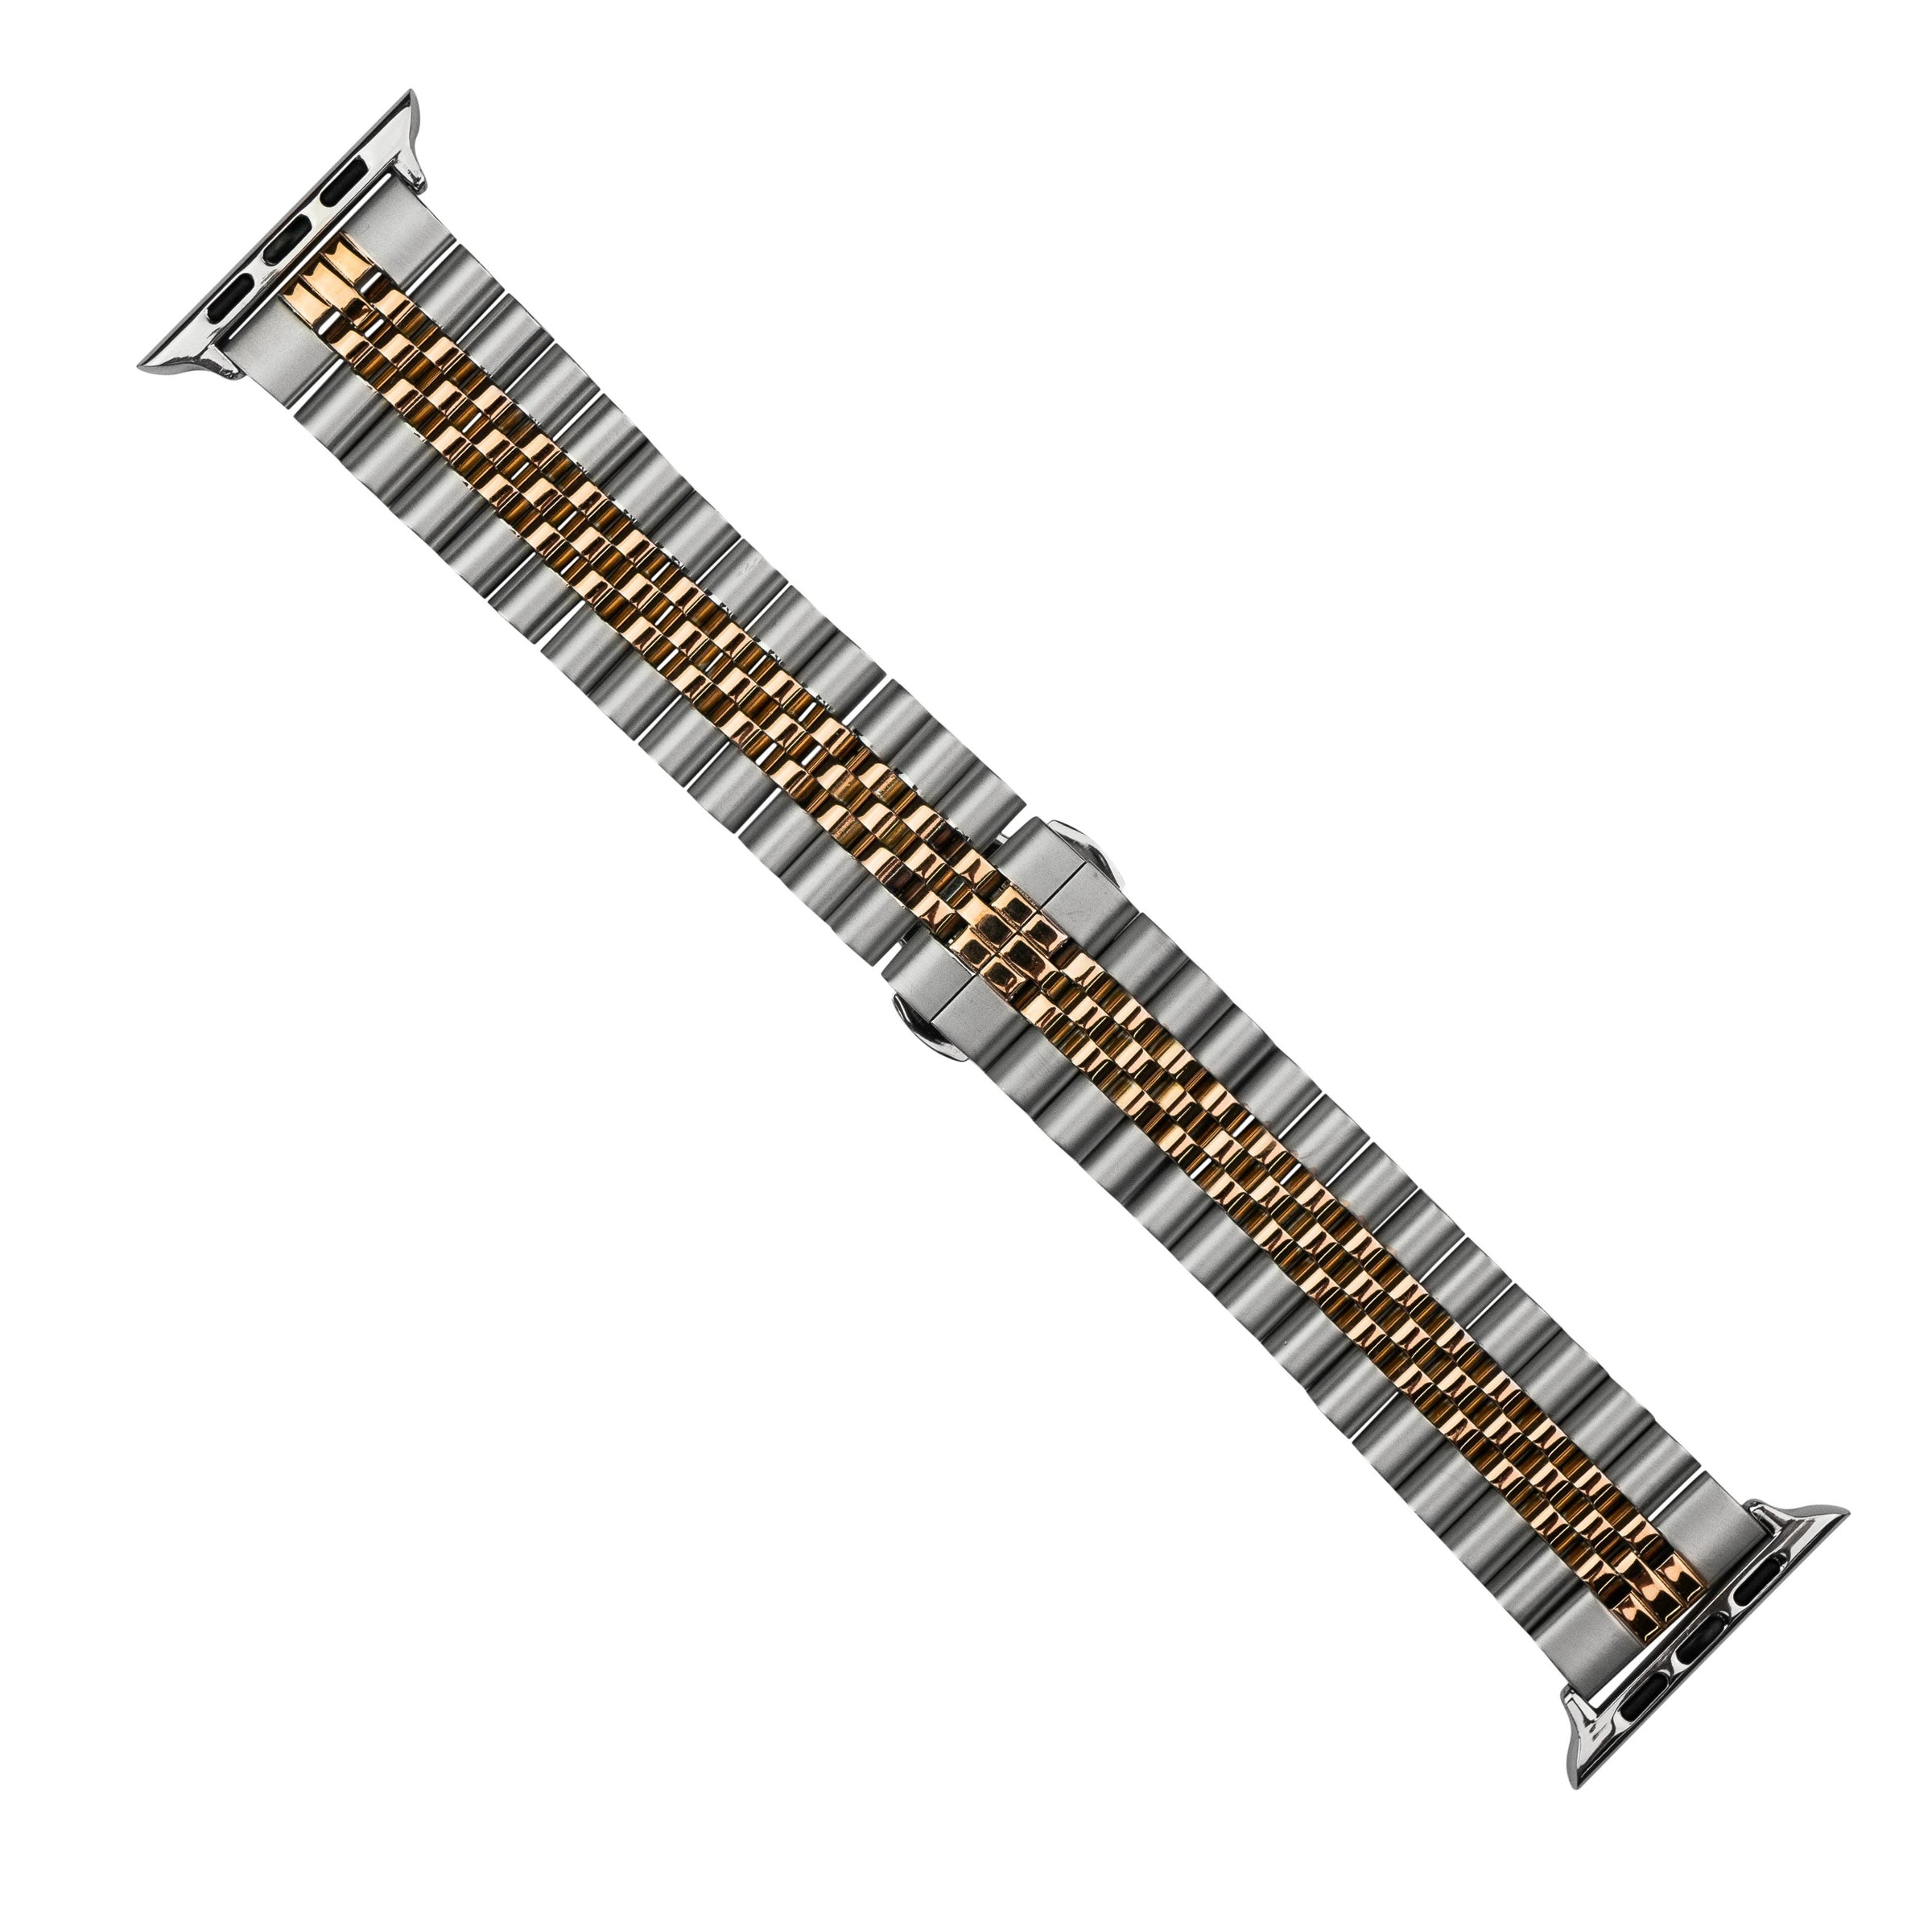 Jubilee Metal Strap in Silver and Rose Gold (Apple Watch)